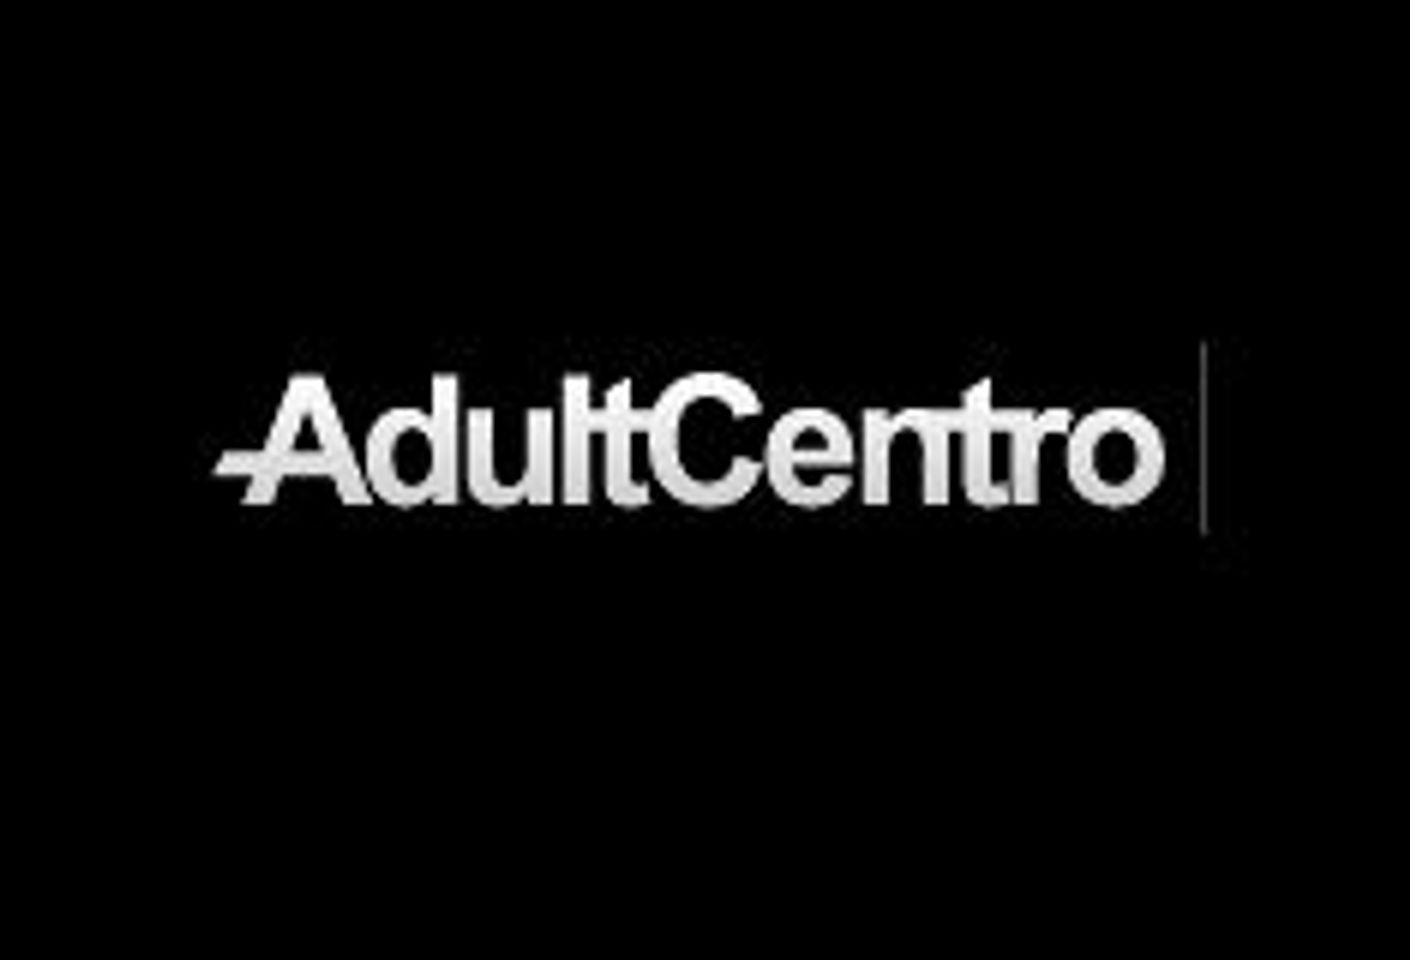 AdultCentro Market Continues to Partner Top Studios for Licensing Options